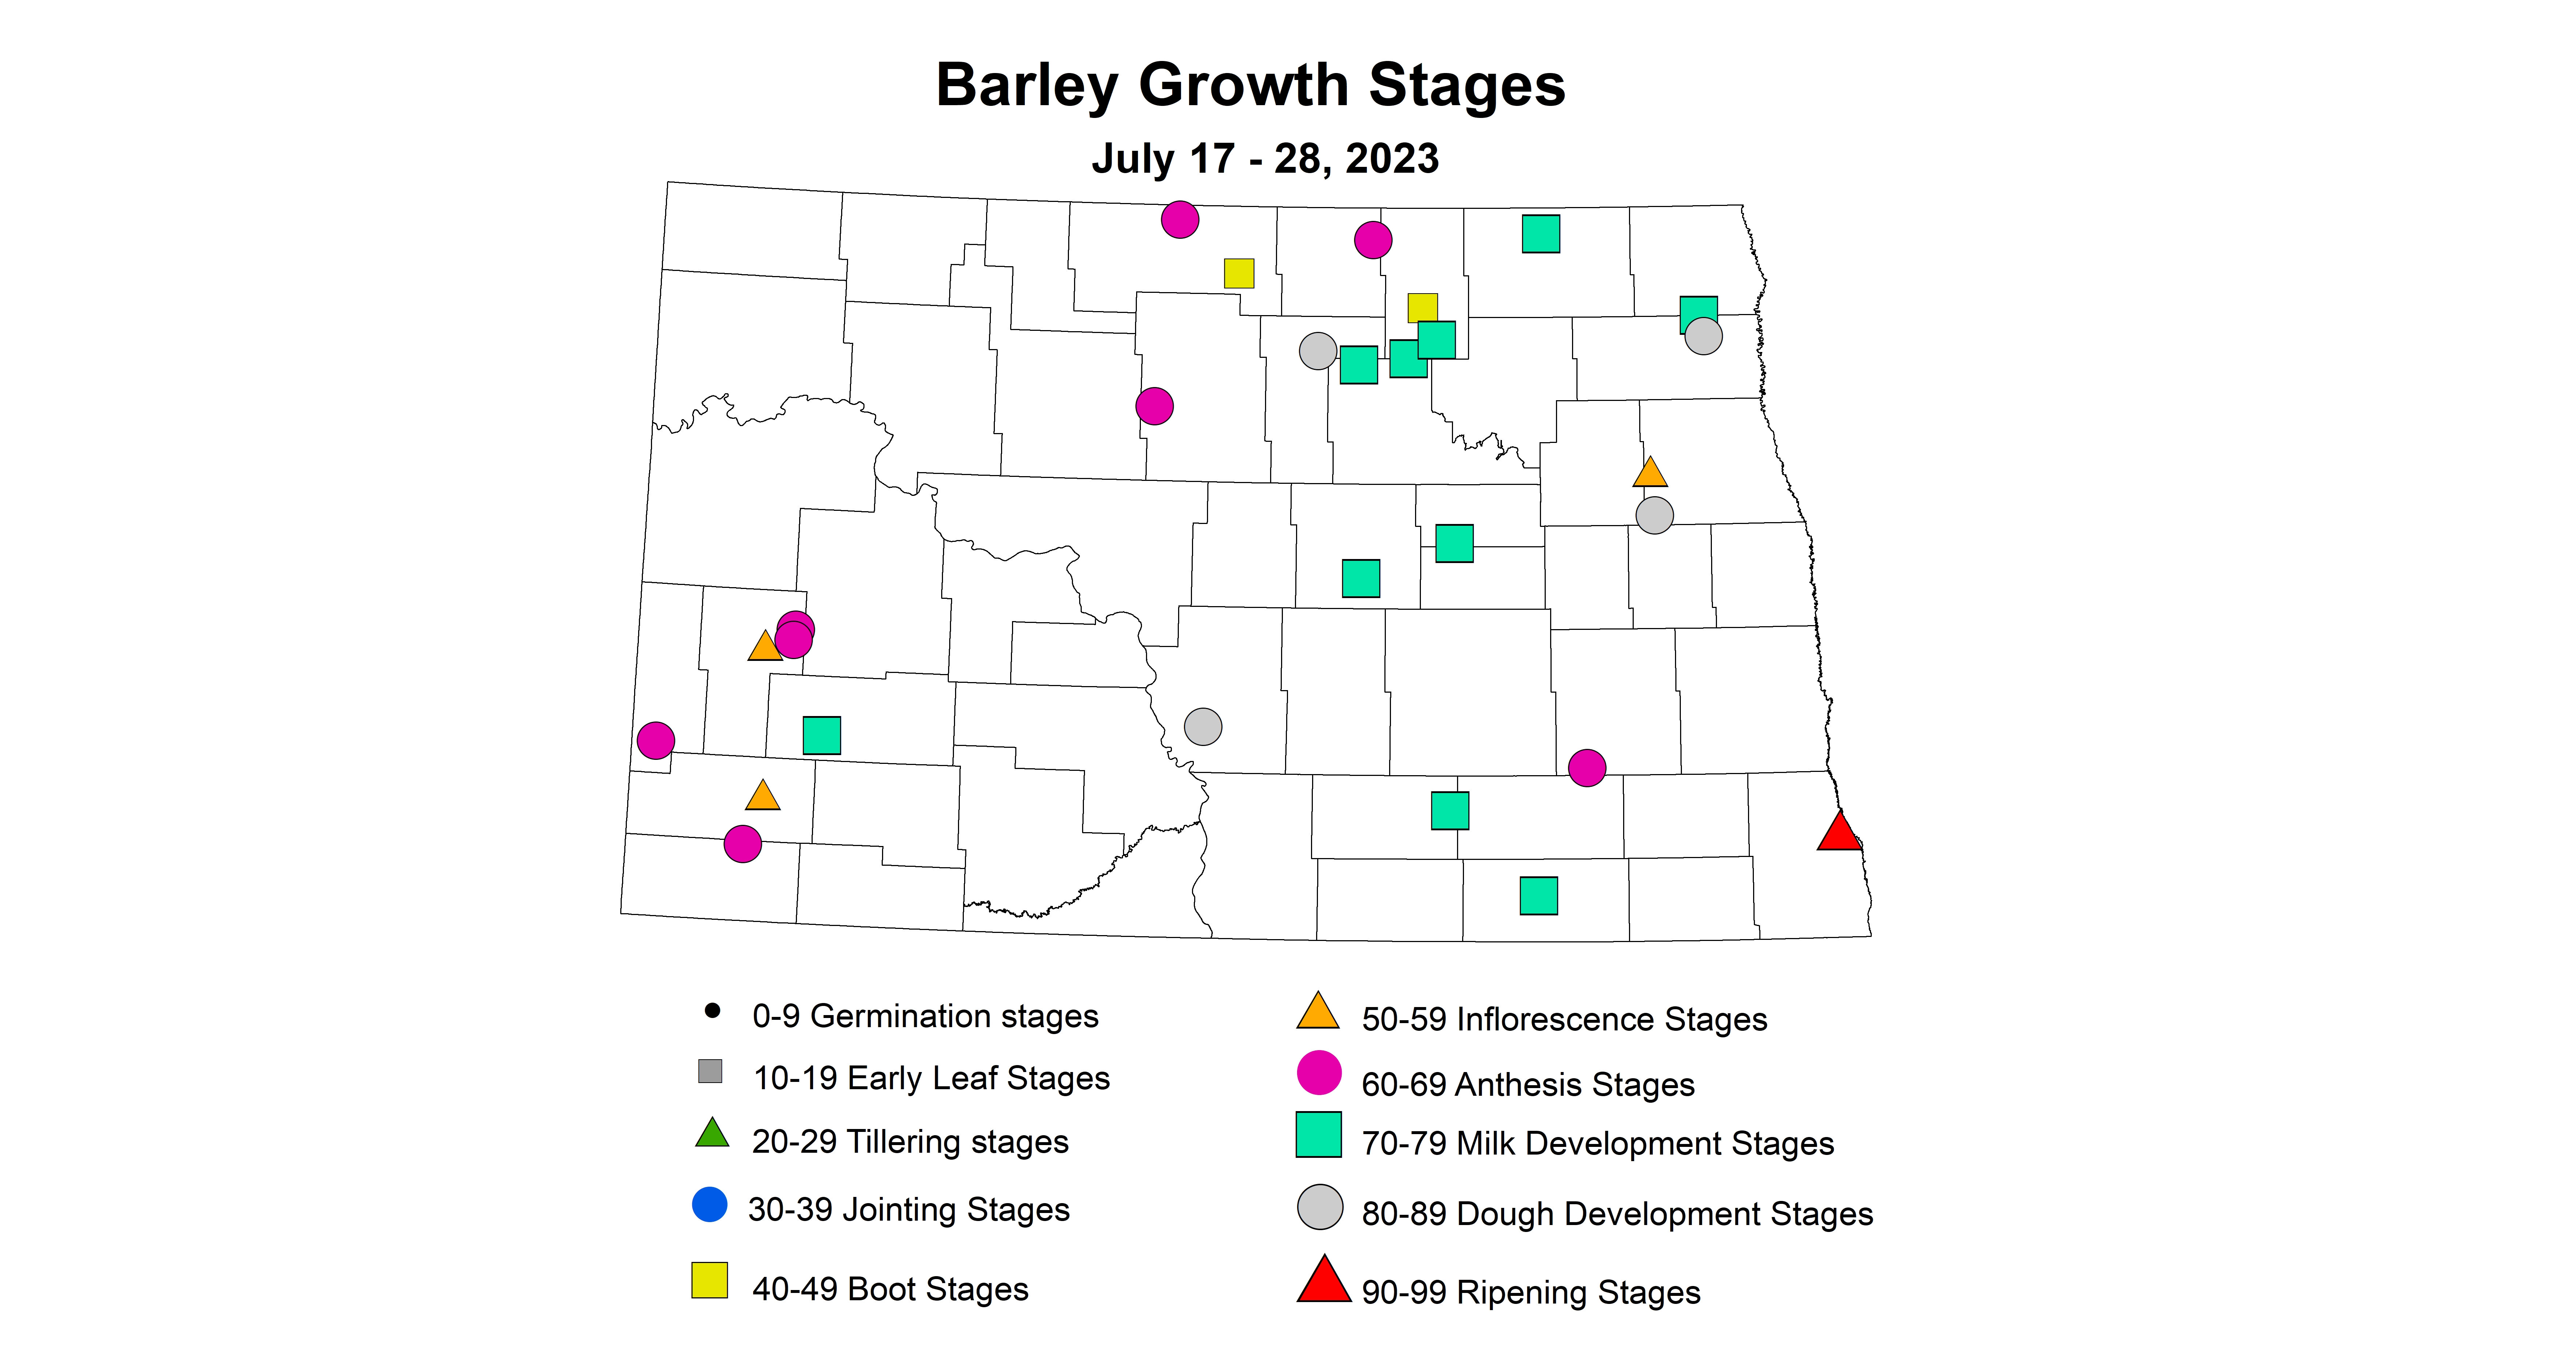 barley growth stages July 17-28 2023